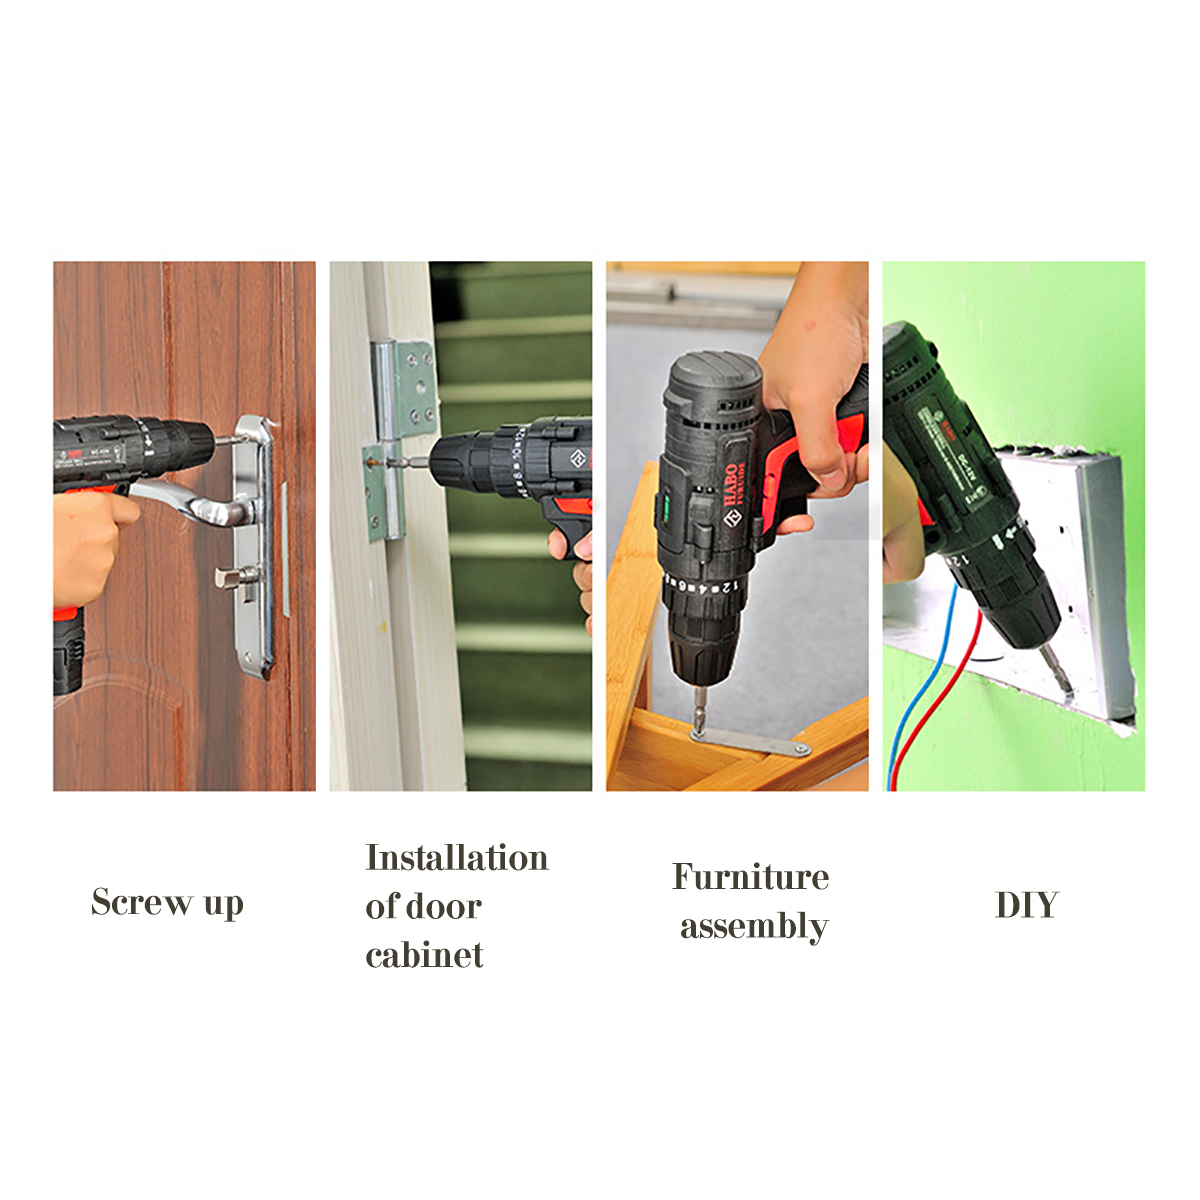 25-V-Drill-2-Speed-Electric-Cordless-Drill-Driver-with-Bits-Set-Batteries-1757270-2